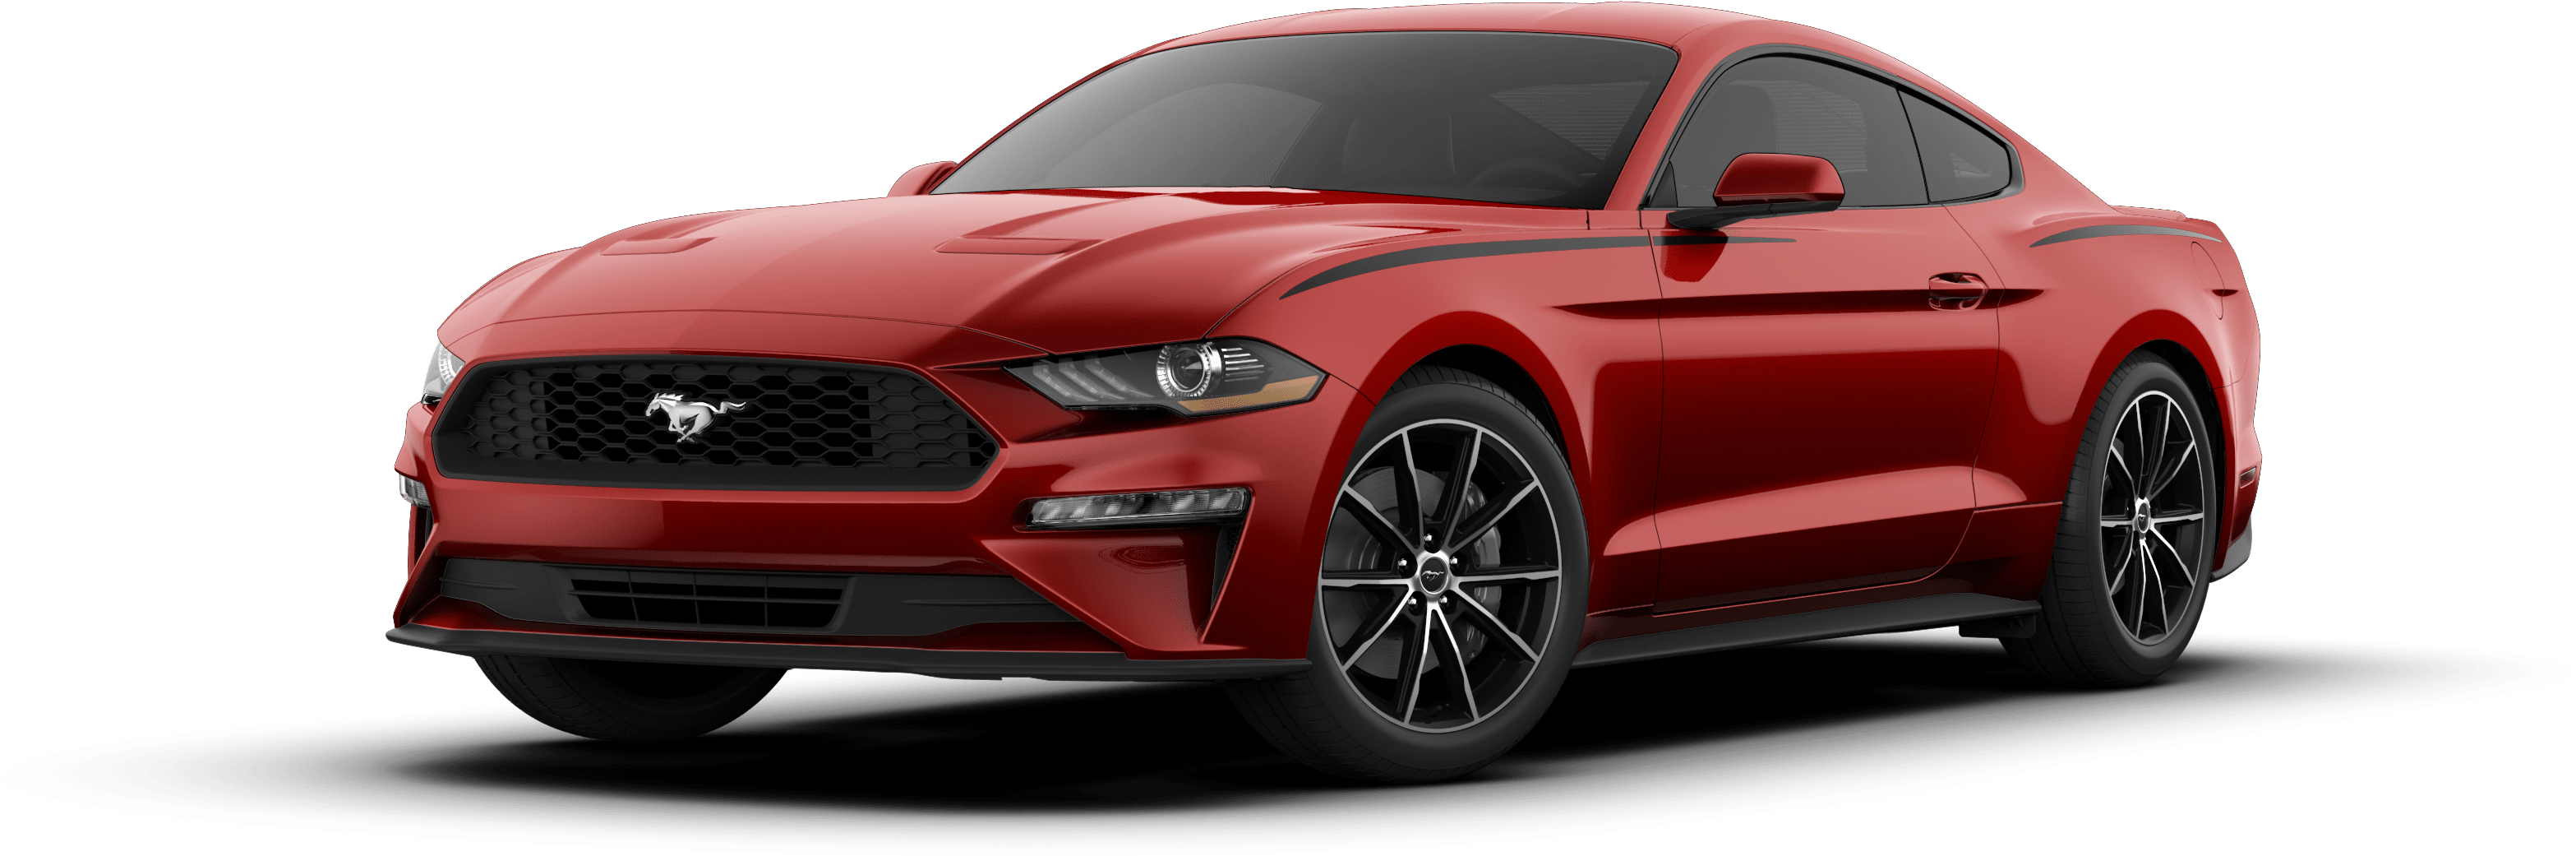 2019 Ford Mustang For Sale In Eunice - Ford Mustang (4000x2250), Png Download